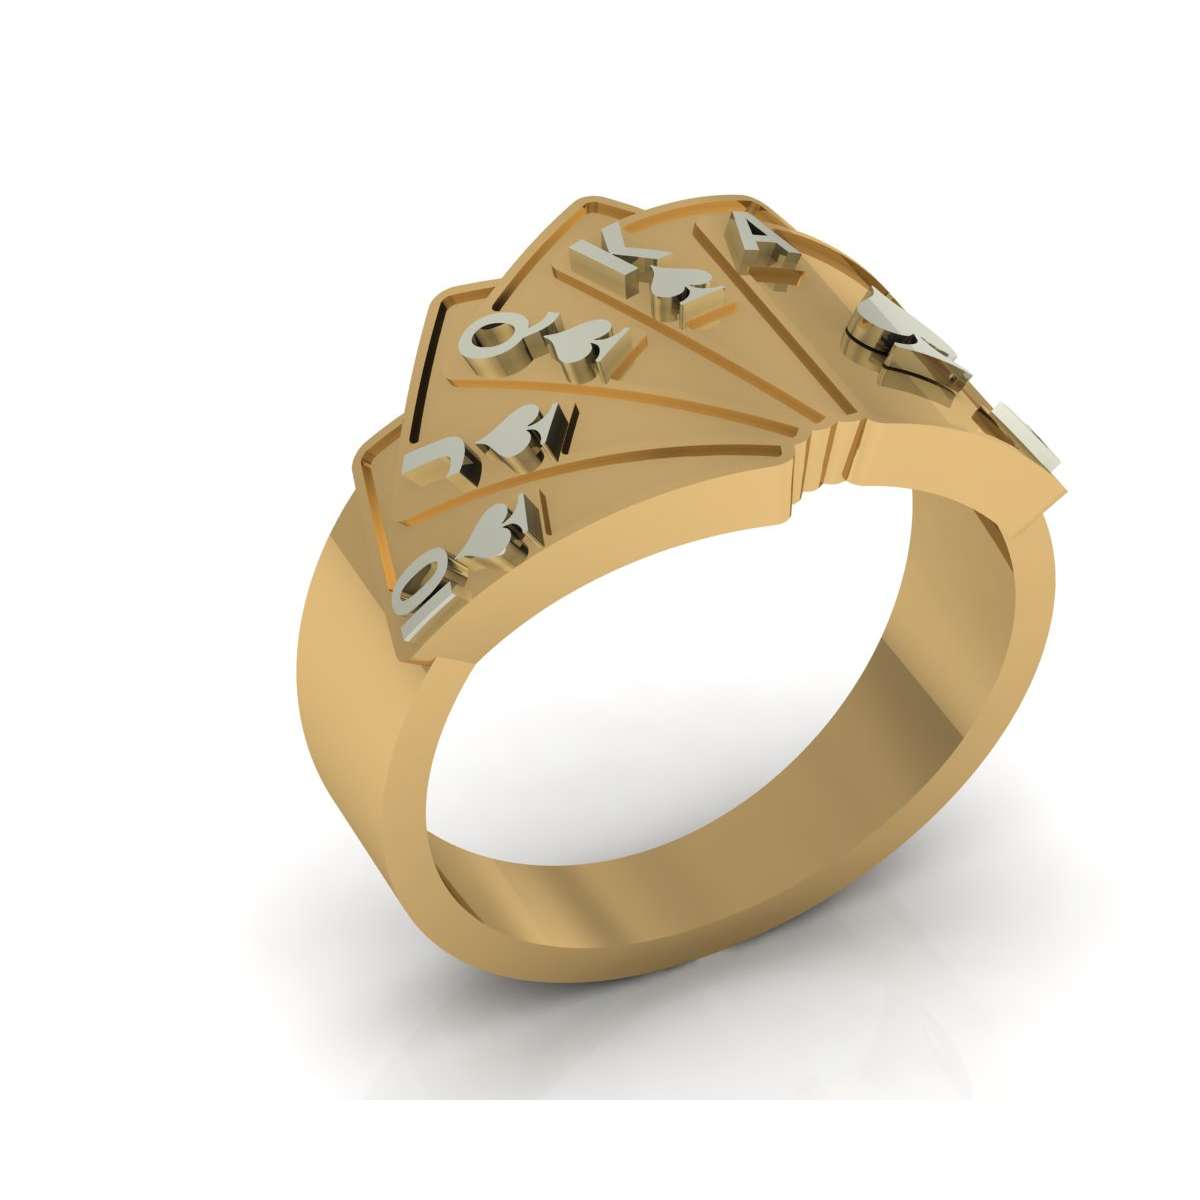 Poker Ring in 18kt yellow and white gold